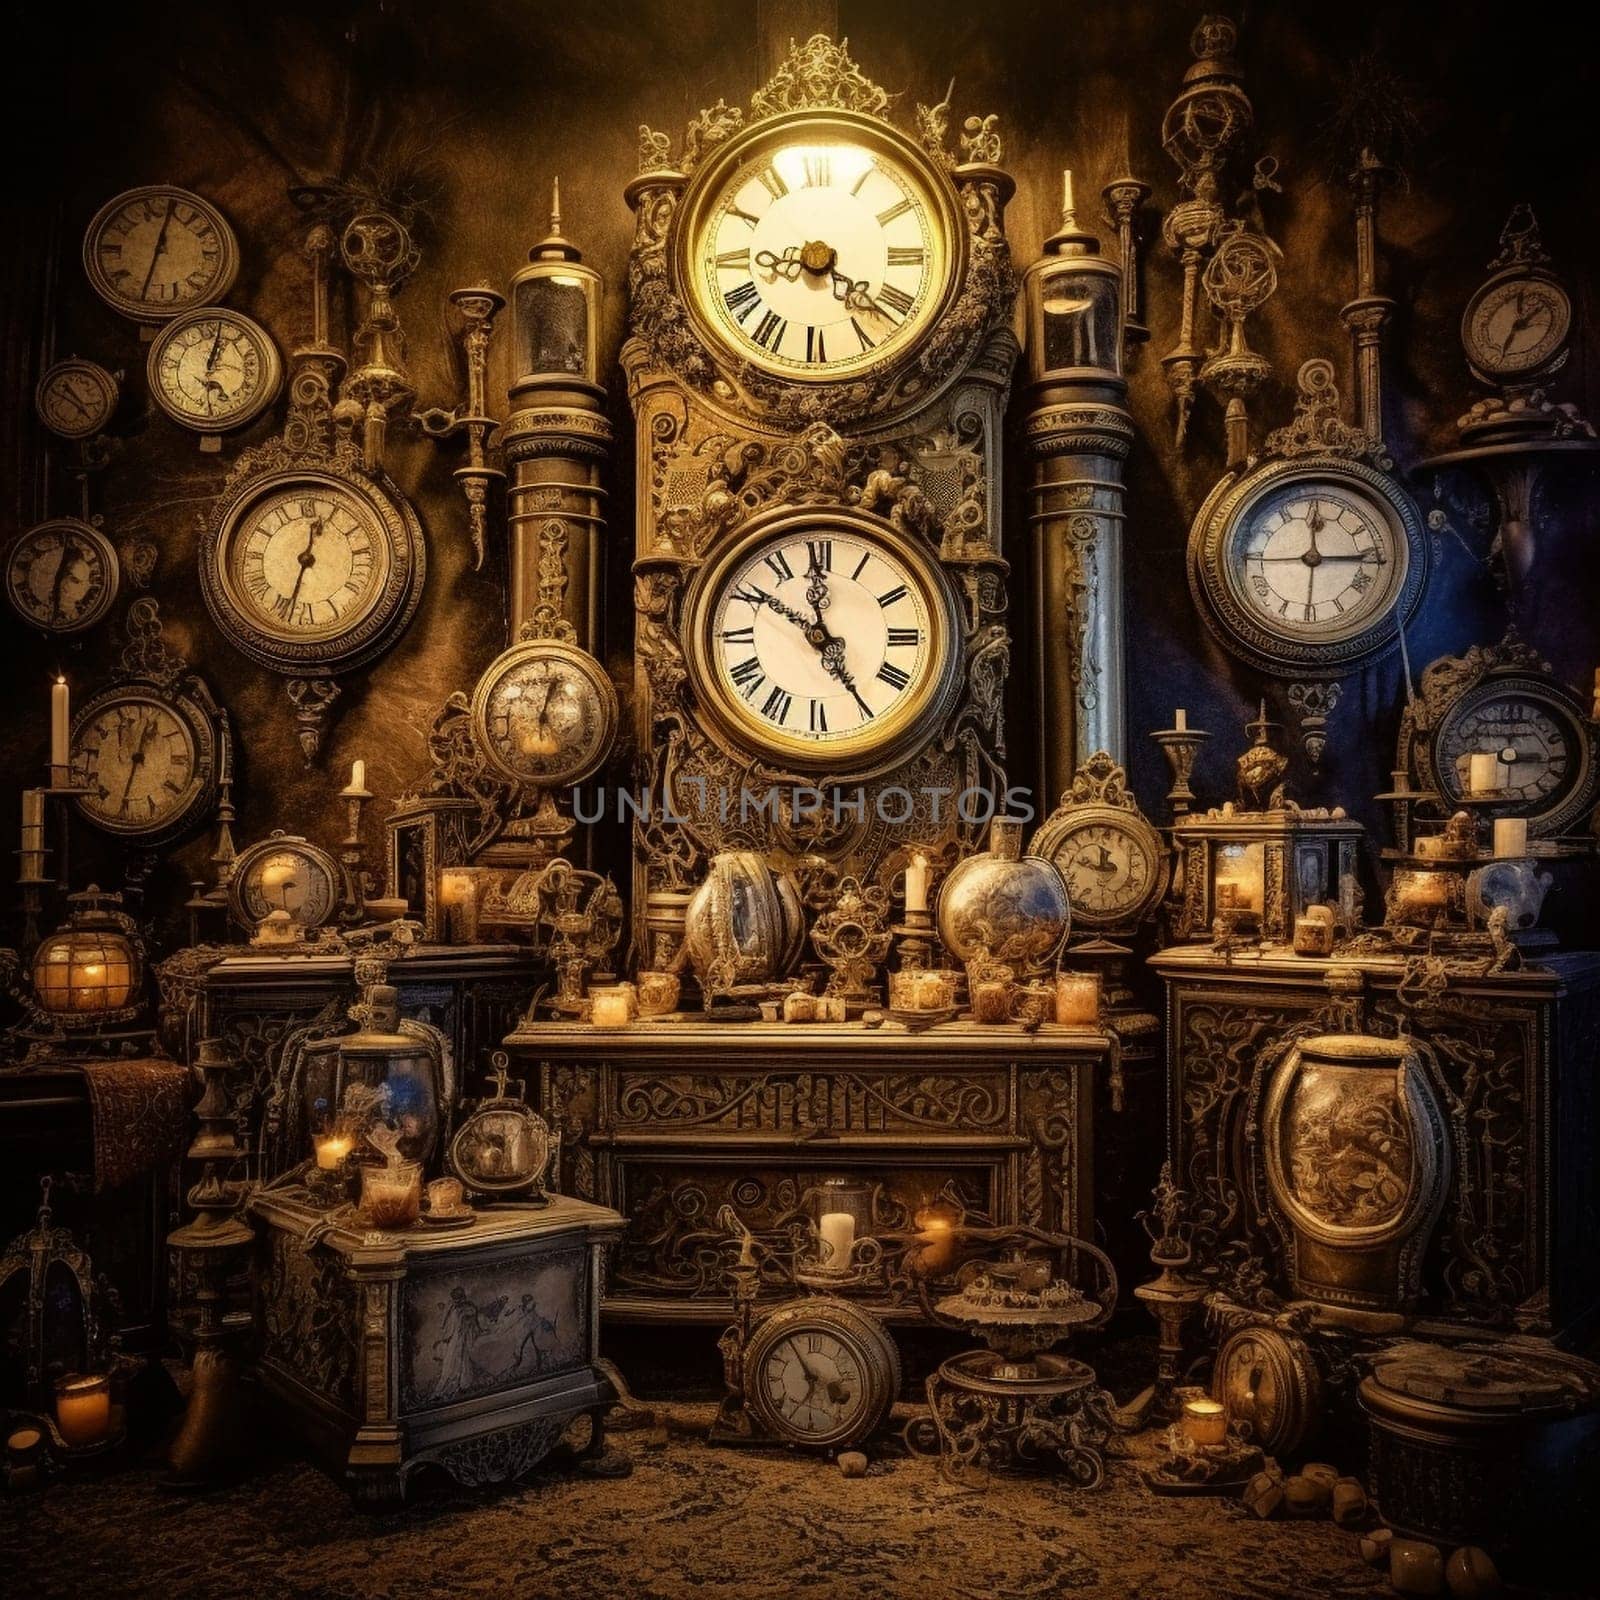 Whispers of the Past: Vintage Clocks in Silent Glory by Sahin